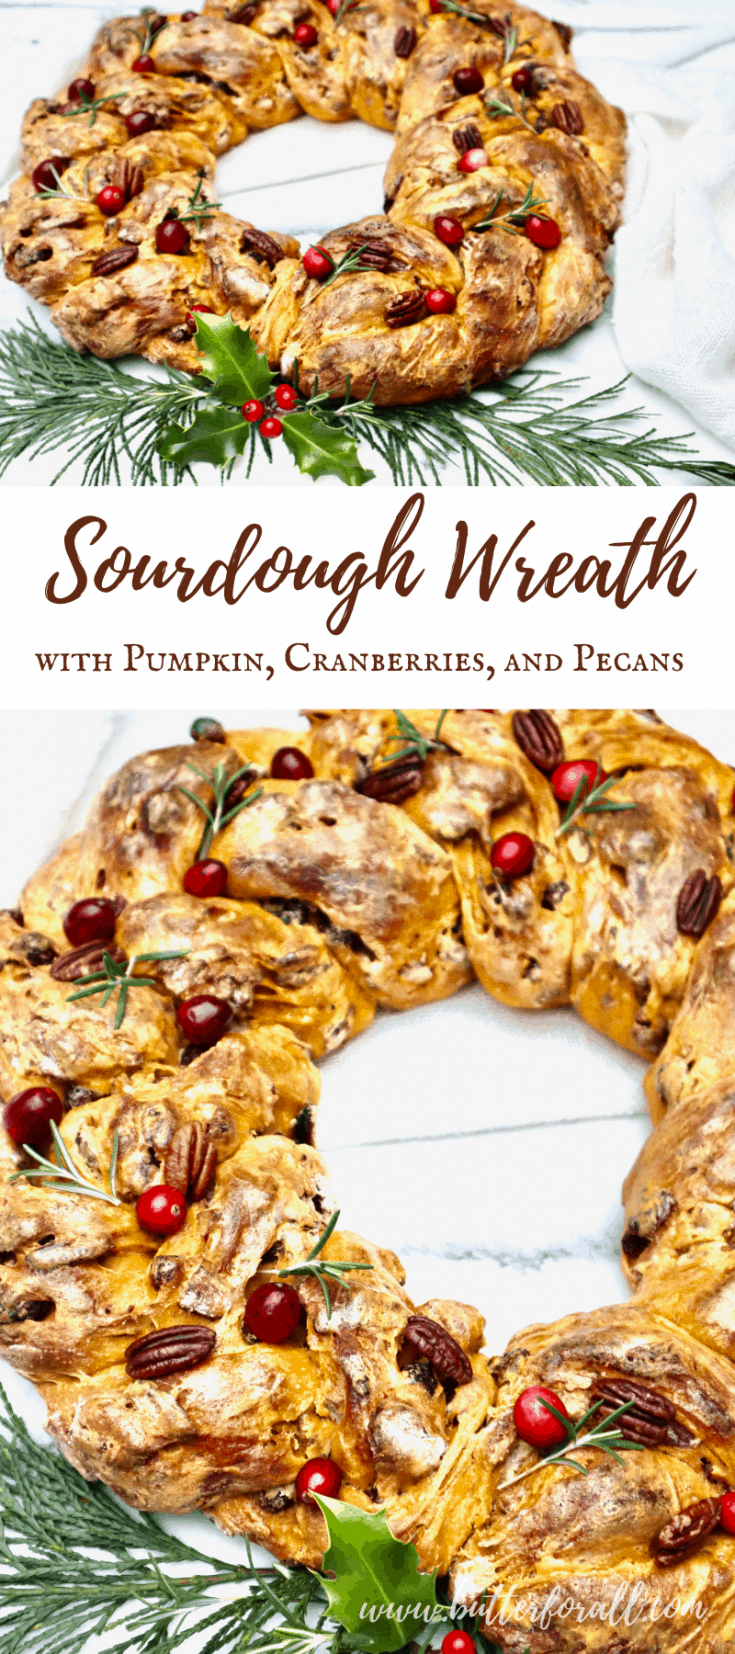 Braided Sourdough Wreath Bread With Pumpkin, Cranberries, and Pecans ...